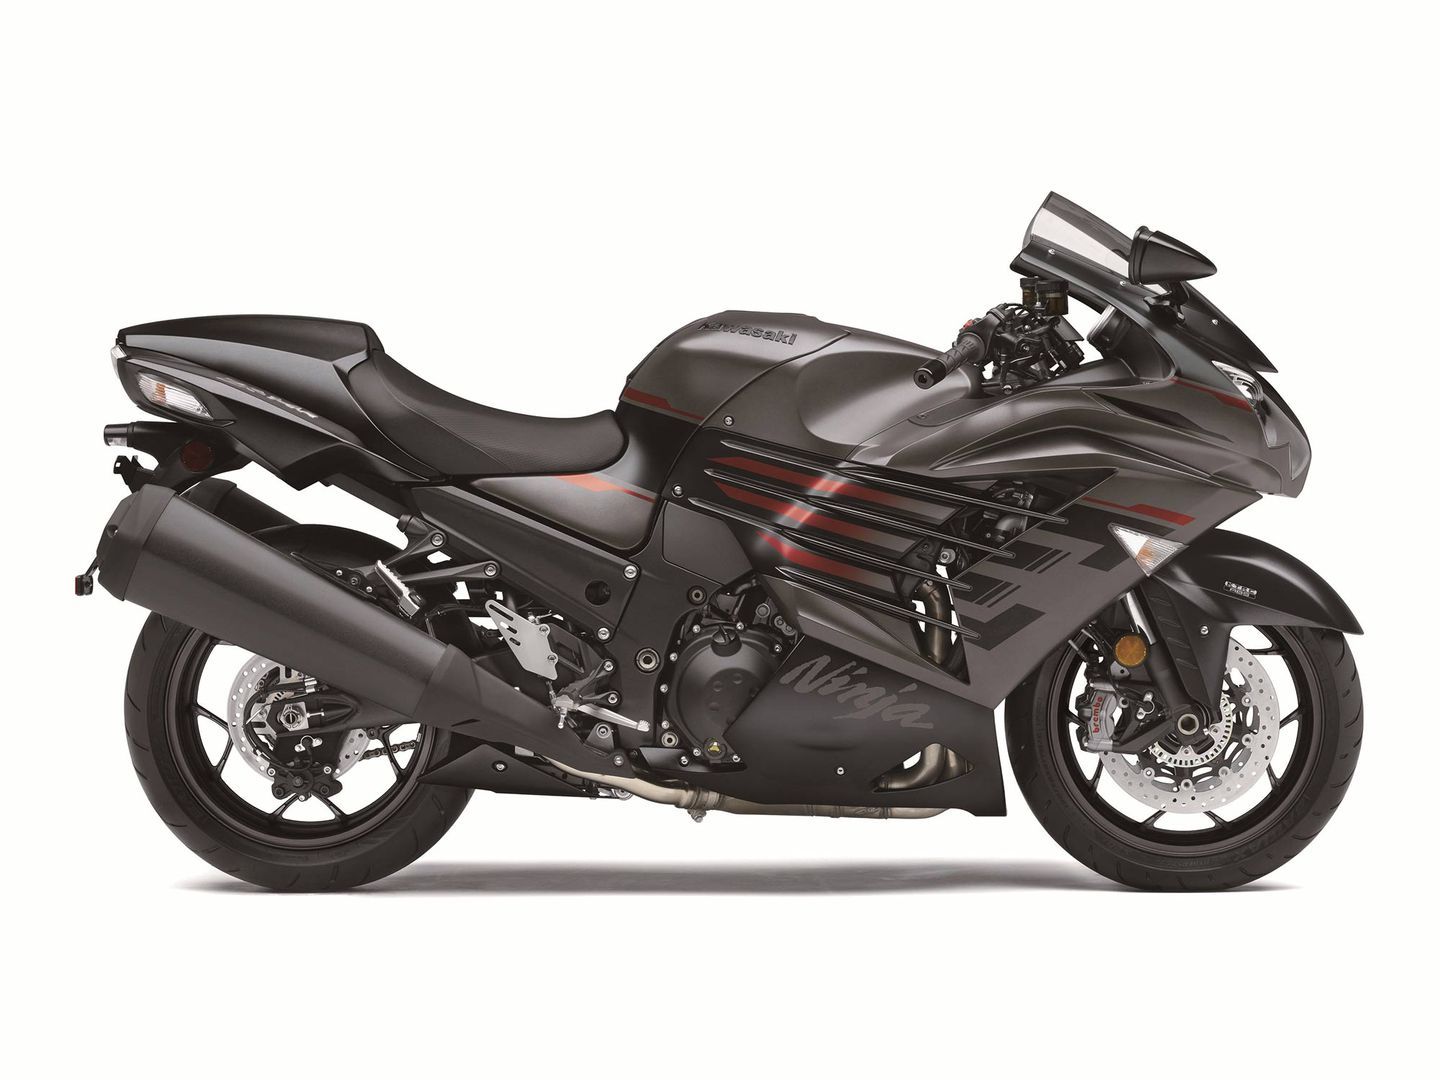 Here Are 10 Reasons Why The Kawasaki ZX-14 Is The Best Of The Best